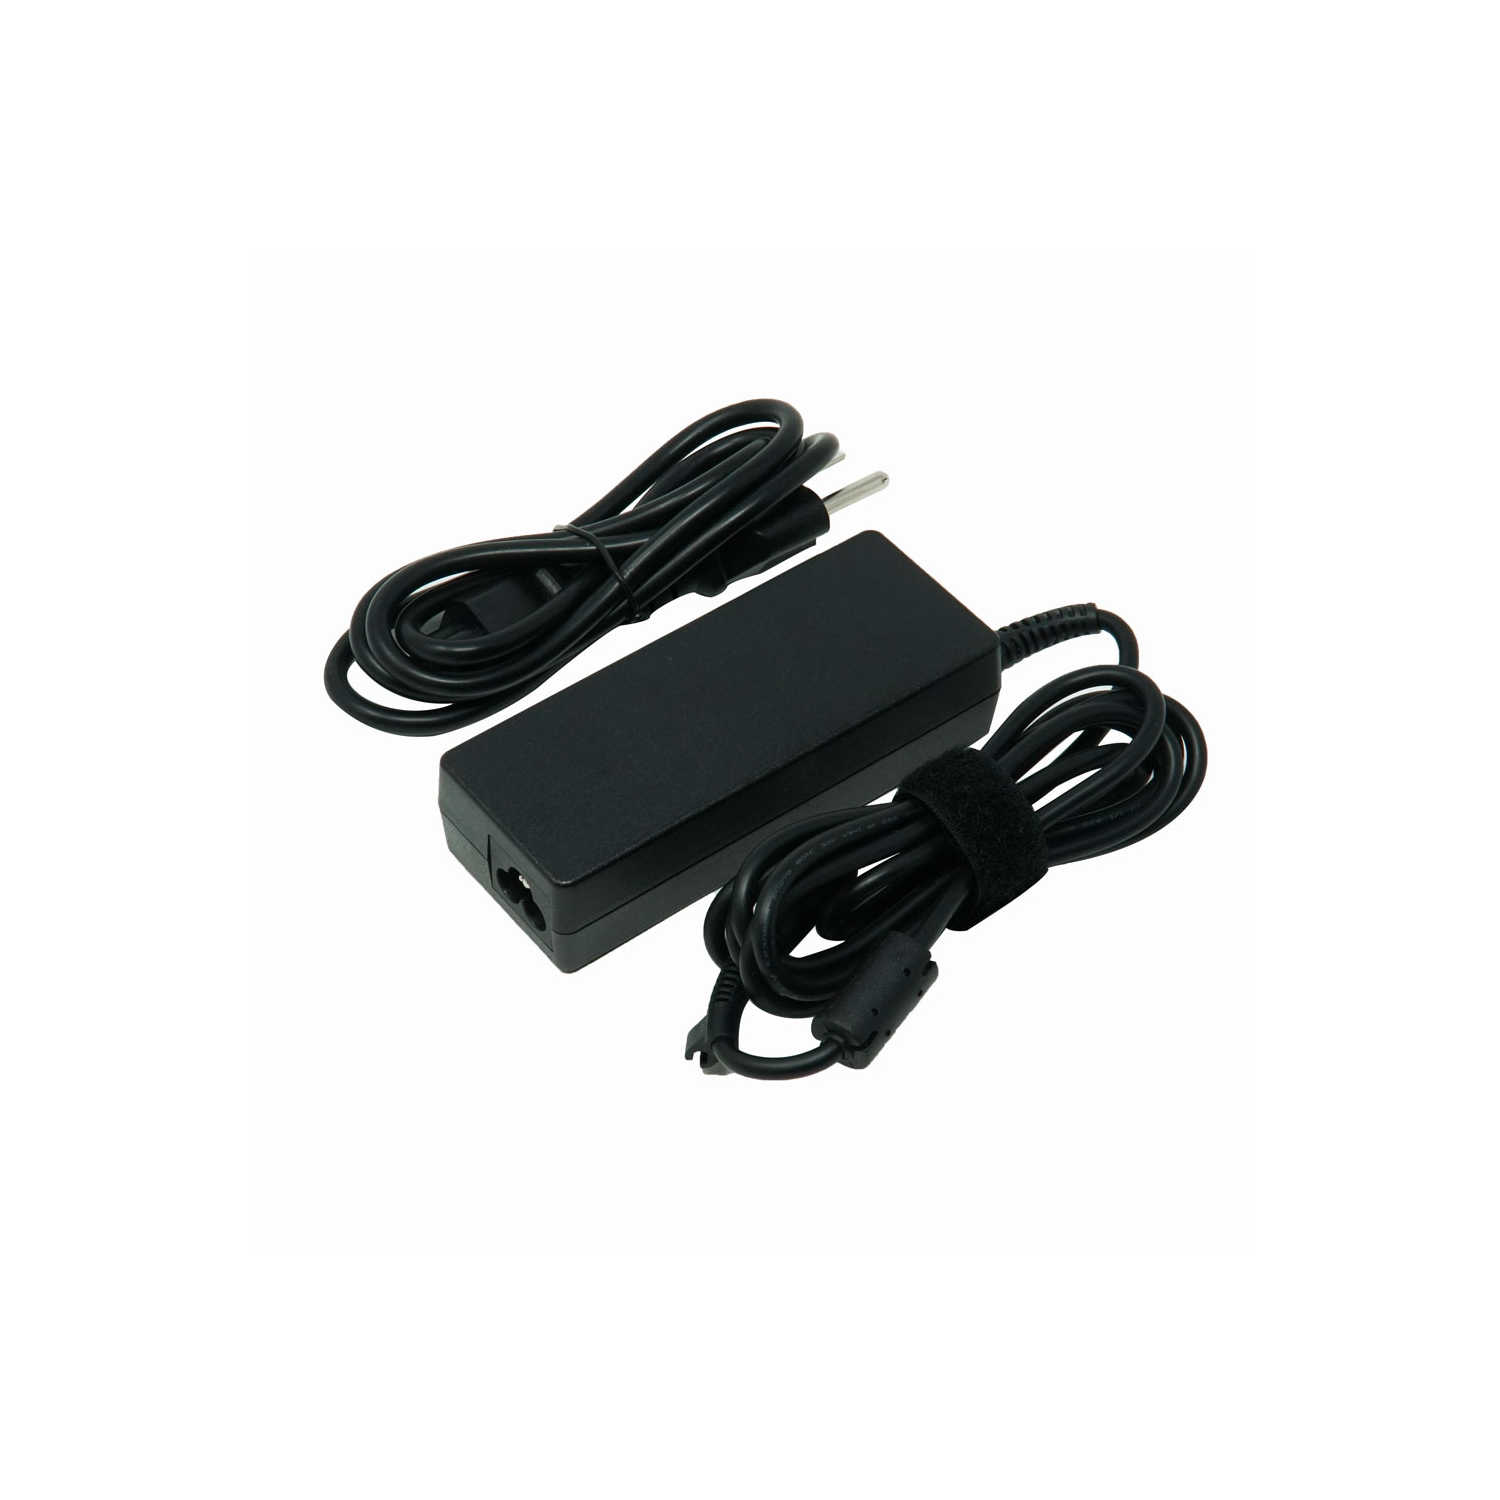 Dr. Battery - Notebook Adapter for HP ProBook 440 G1 / 440 G2 / 4430s / 4440s / 463552-004 / 463553-001 - Free Shipping